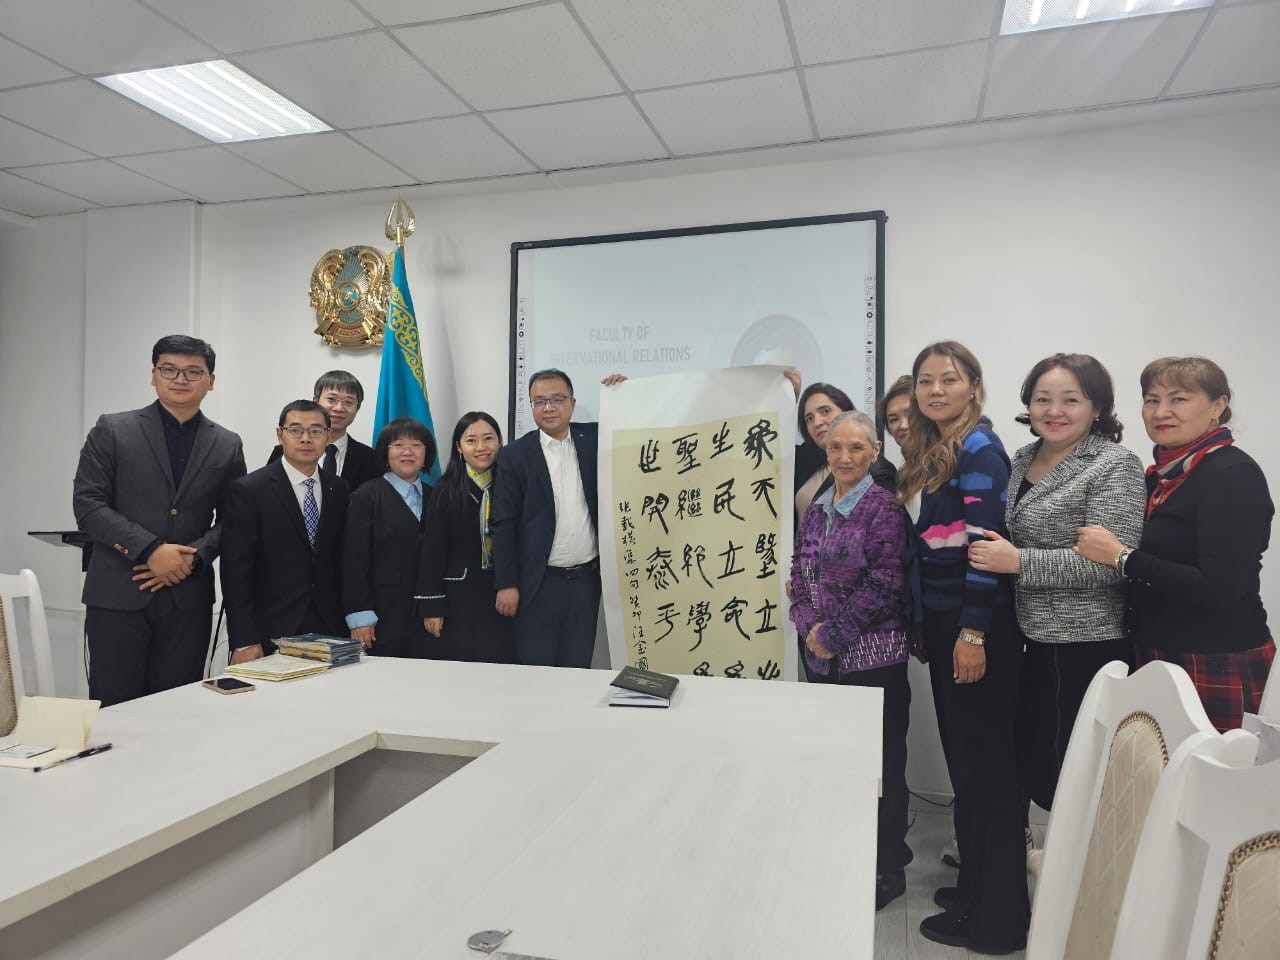 IRF administration and the delegation of the School of Politics & International Relations of Lanzhou University